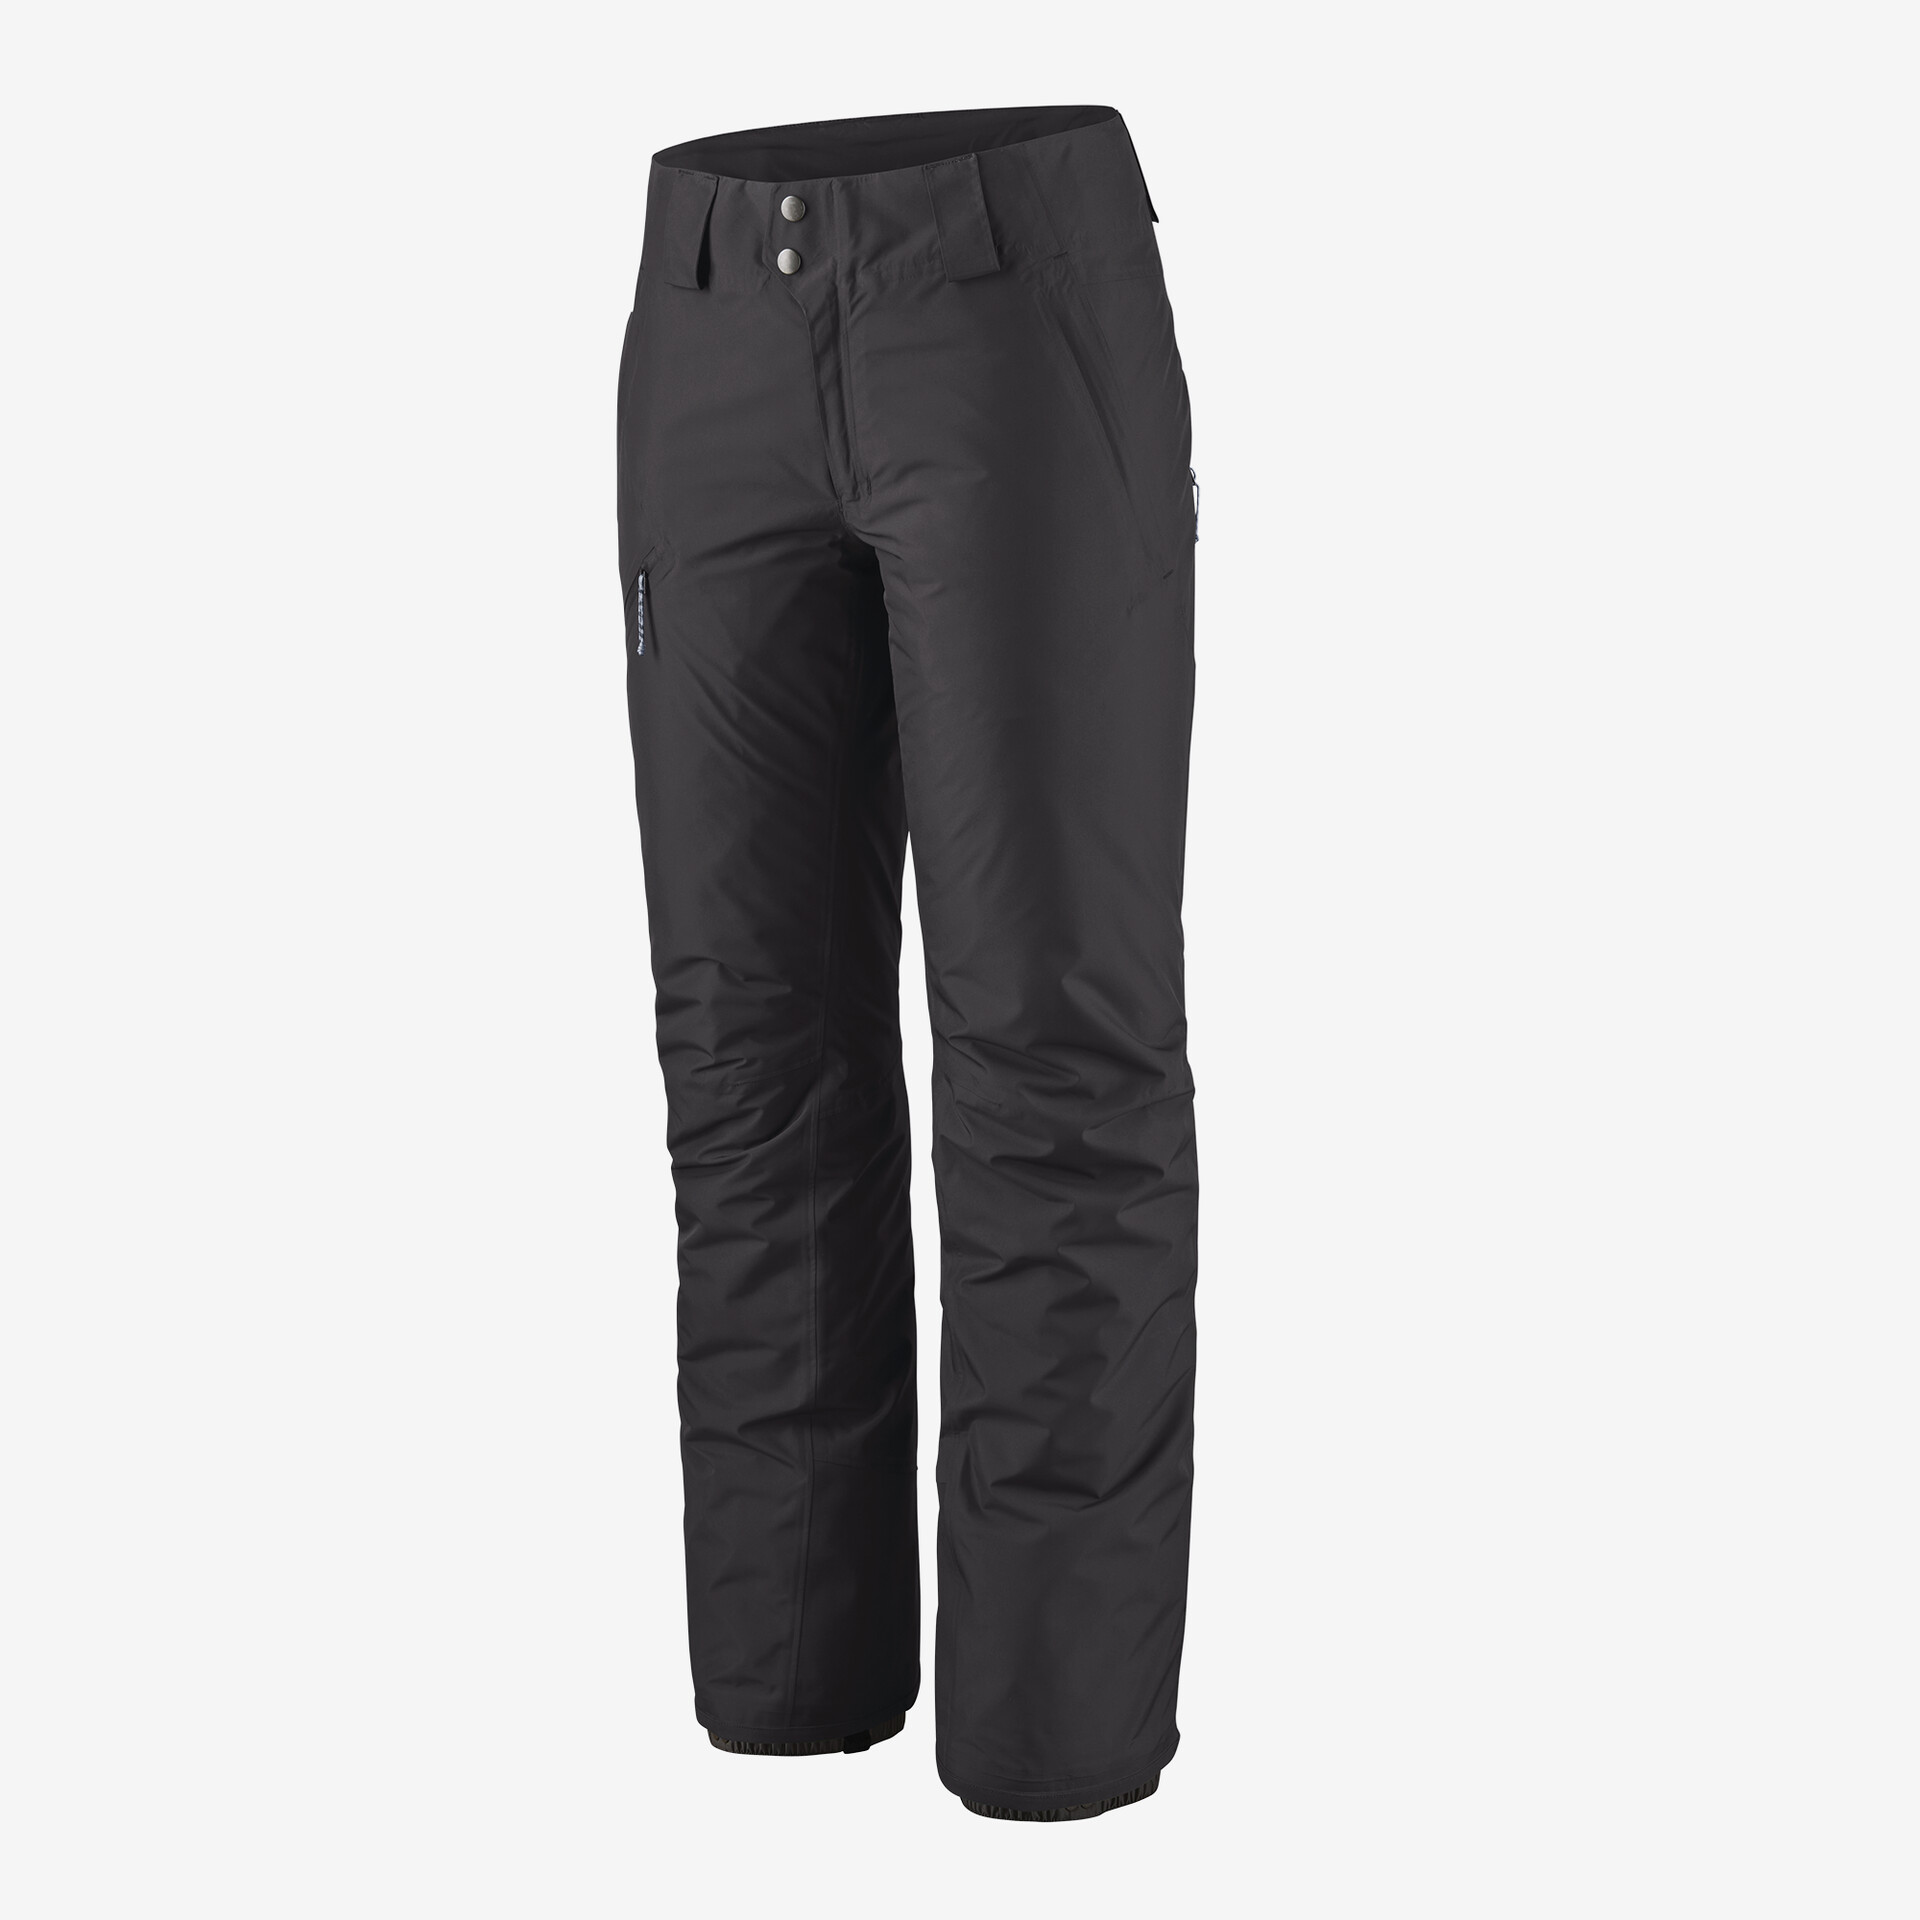 Patagonia Women’s Insulated Powder Town Pants – Short